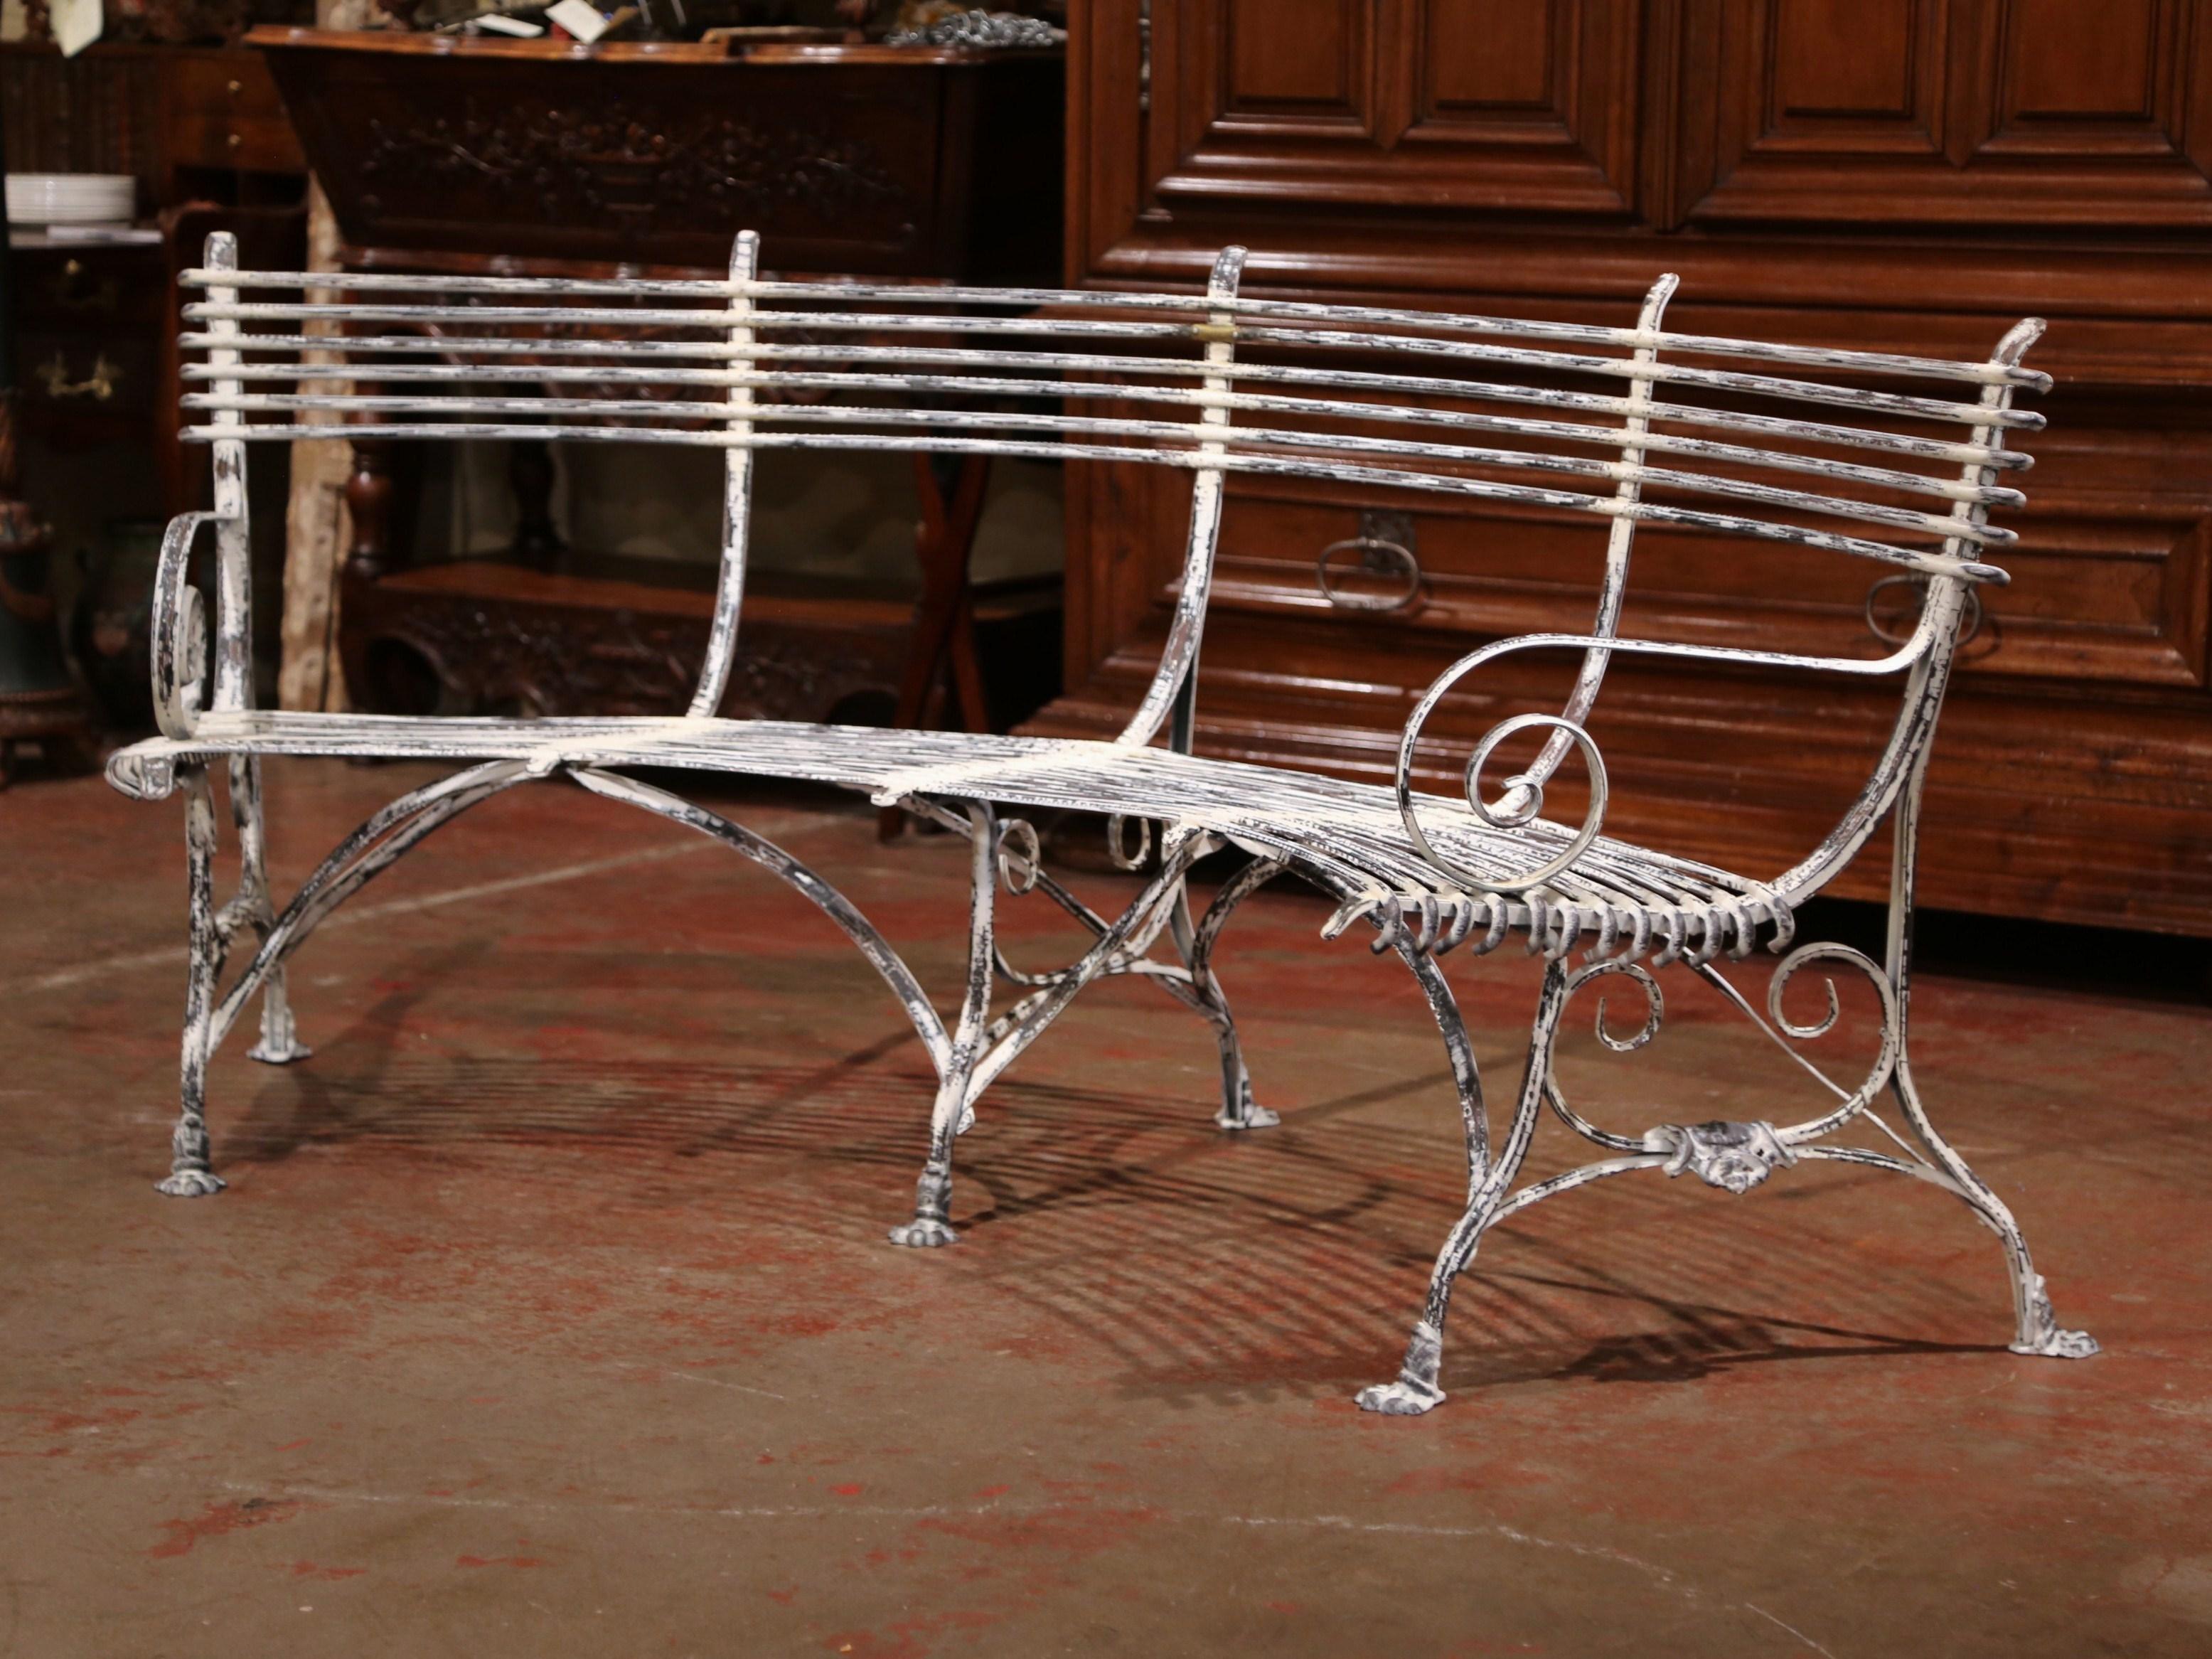 This elegant forged and curved iron bench was crafted in France. The rounded bench has gracious lines, scrolled armrests, a curved back and six paw feet connected with stretchers; the seating has a antique white patinated paint finish. The bench is